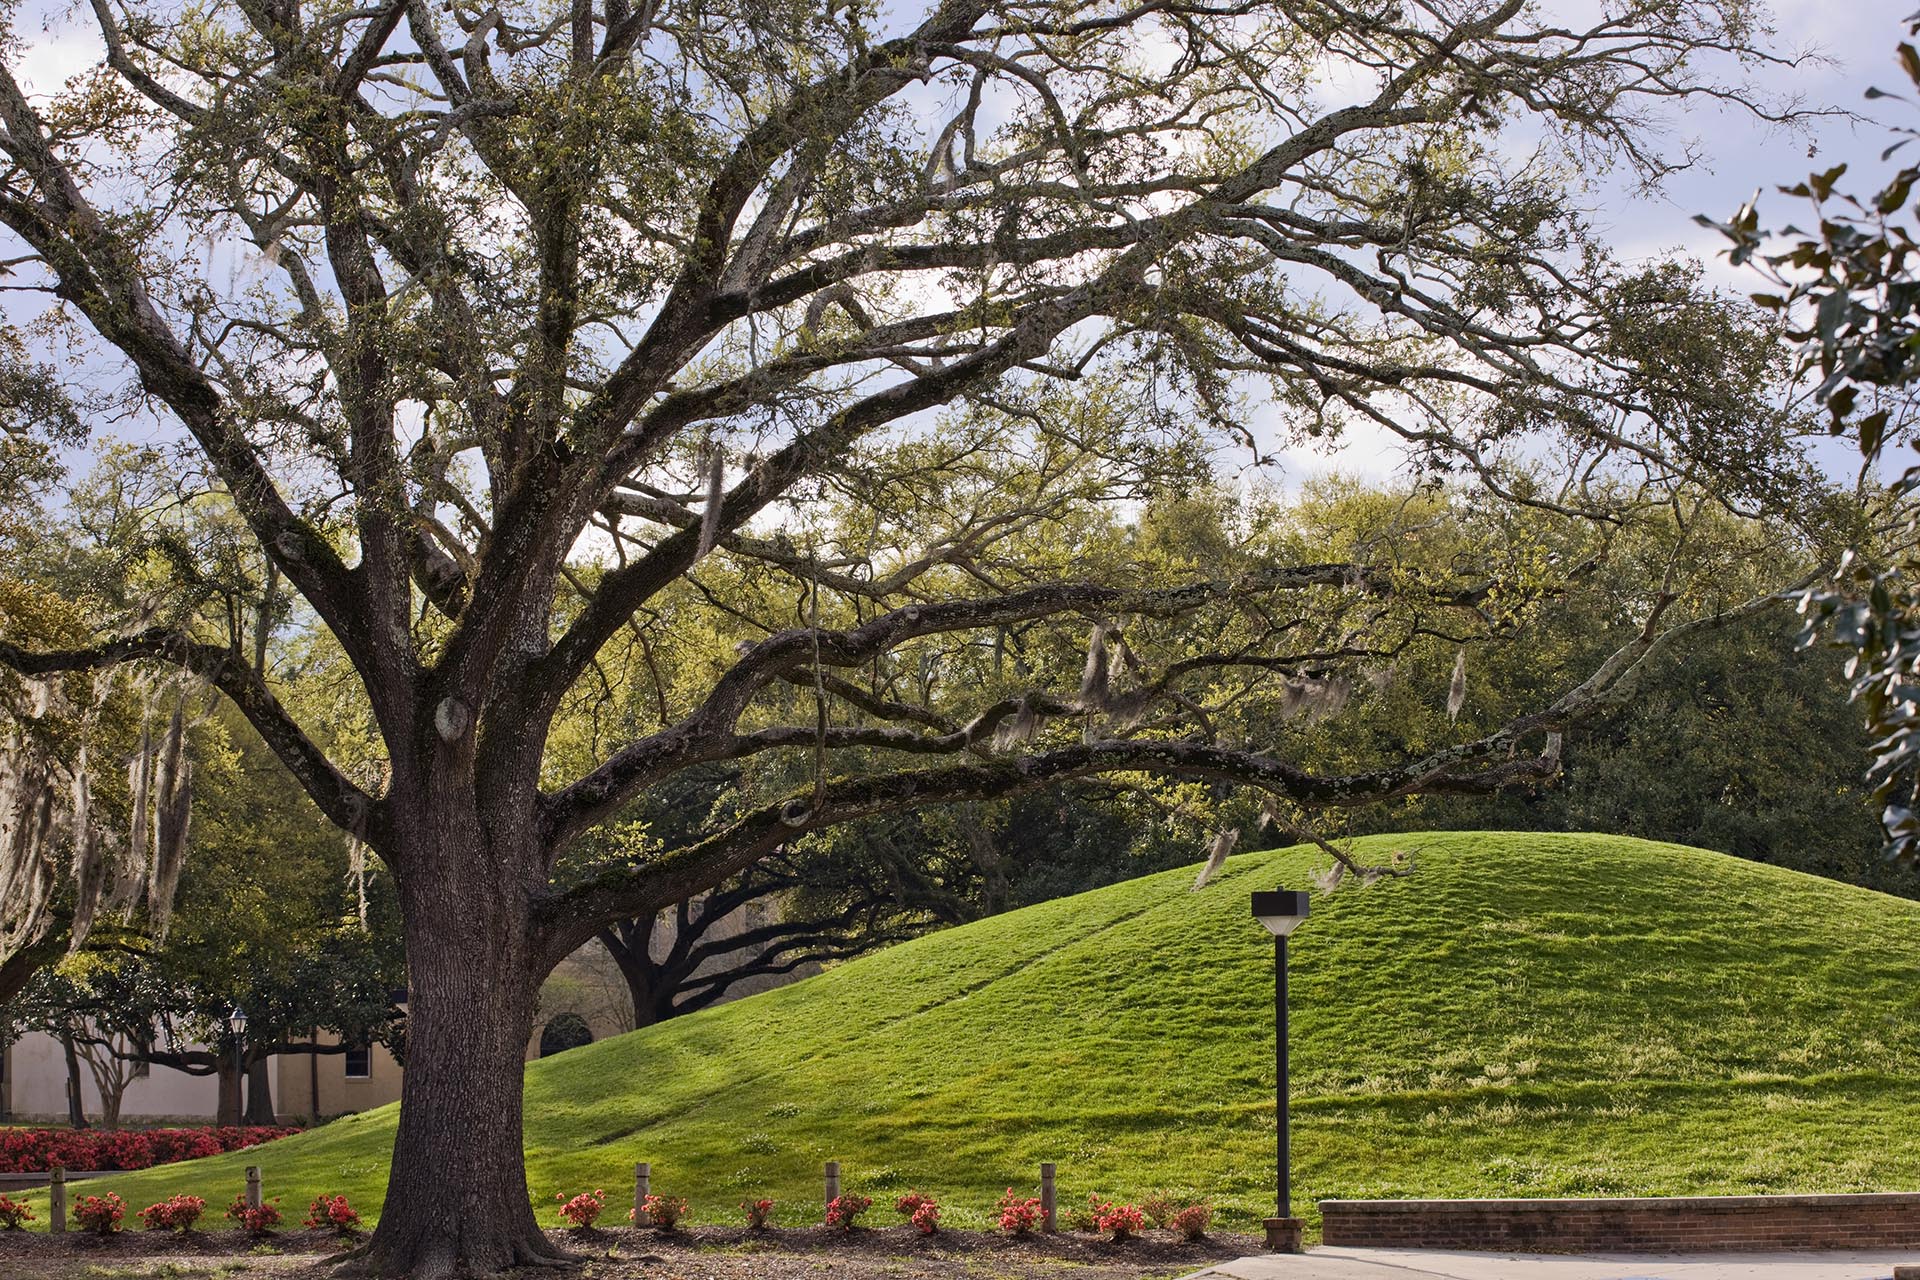 Image of LSU Campus Indian Mounds with oak tree in foreground.